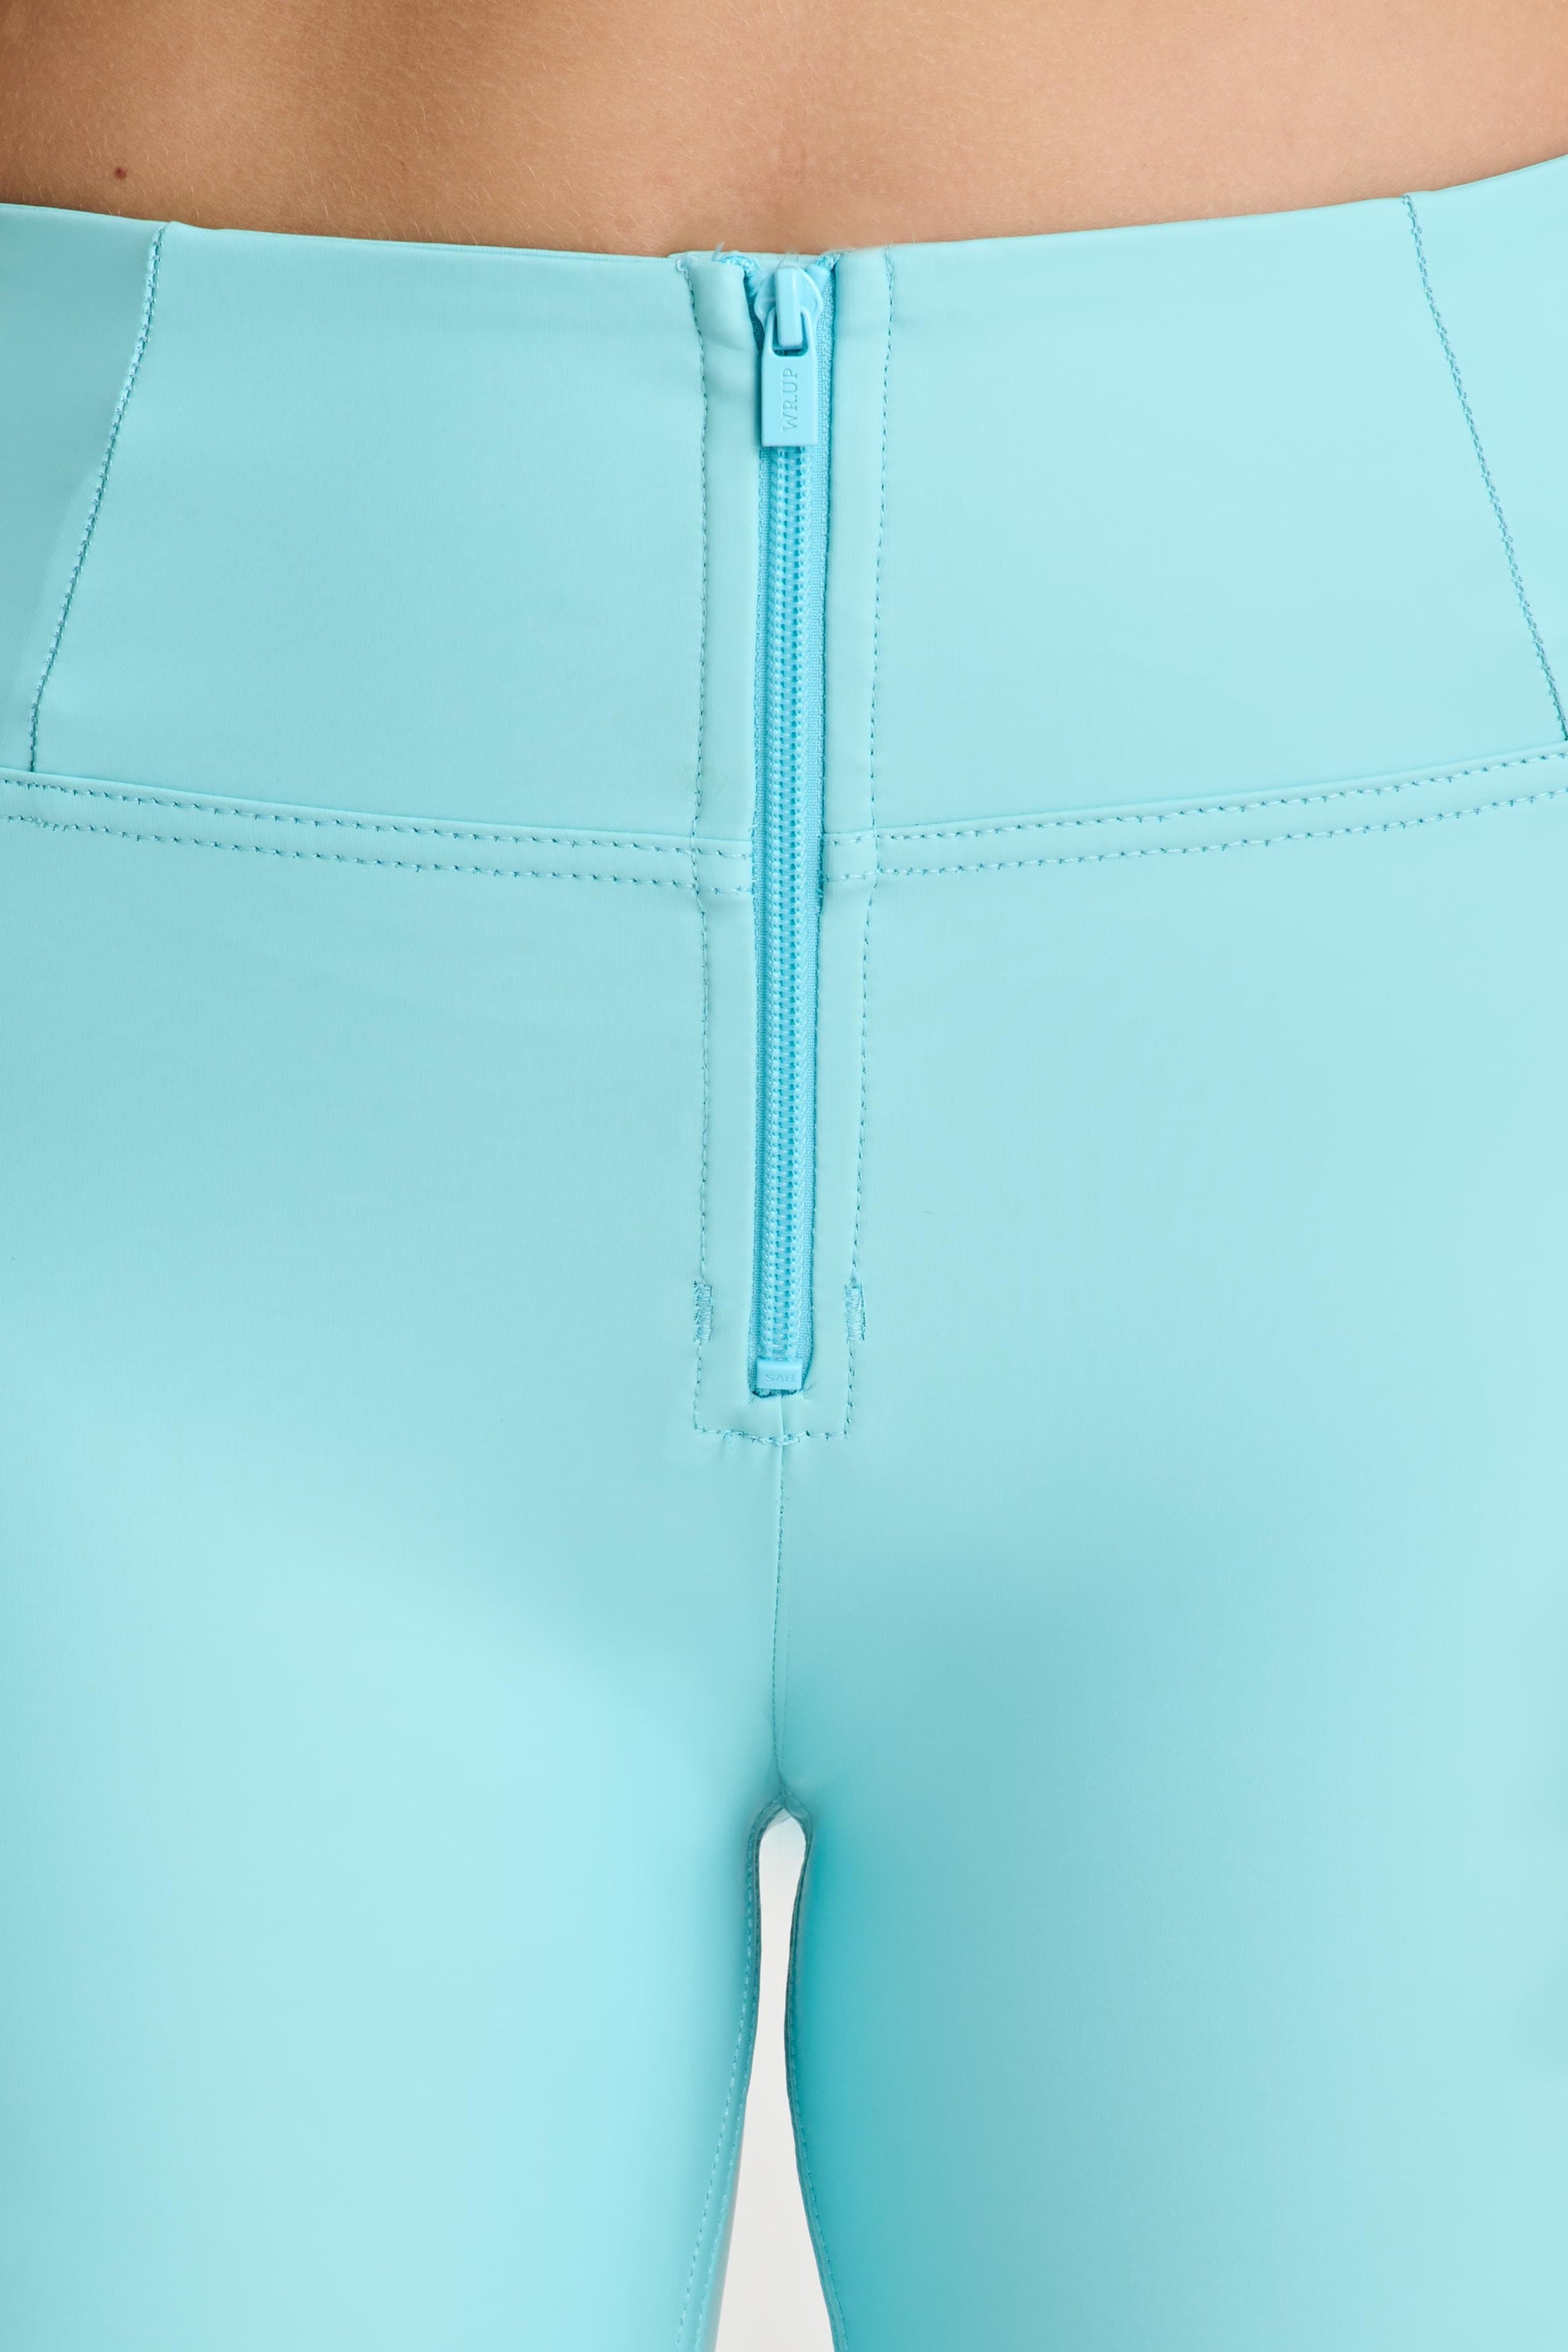 WR.UP® Faux Leather - High Waisted - Full Length - Sky Blue 6